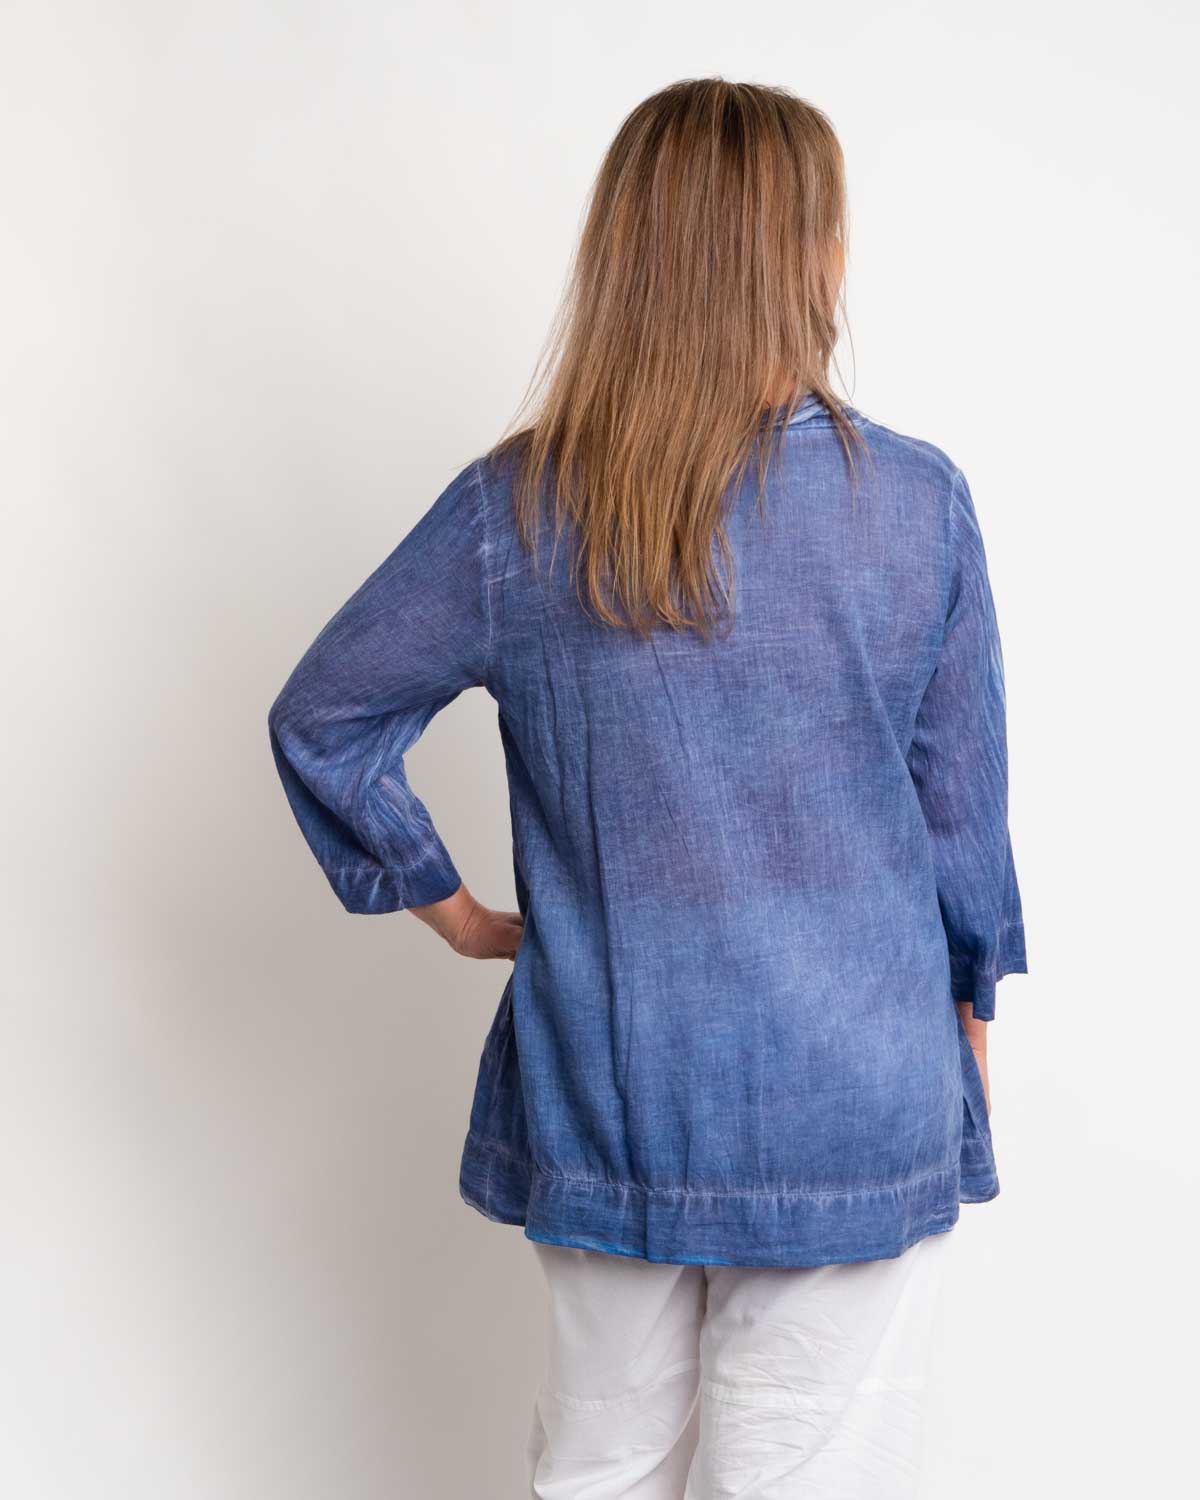 Pleated Summer Top in Blue Wash